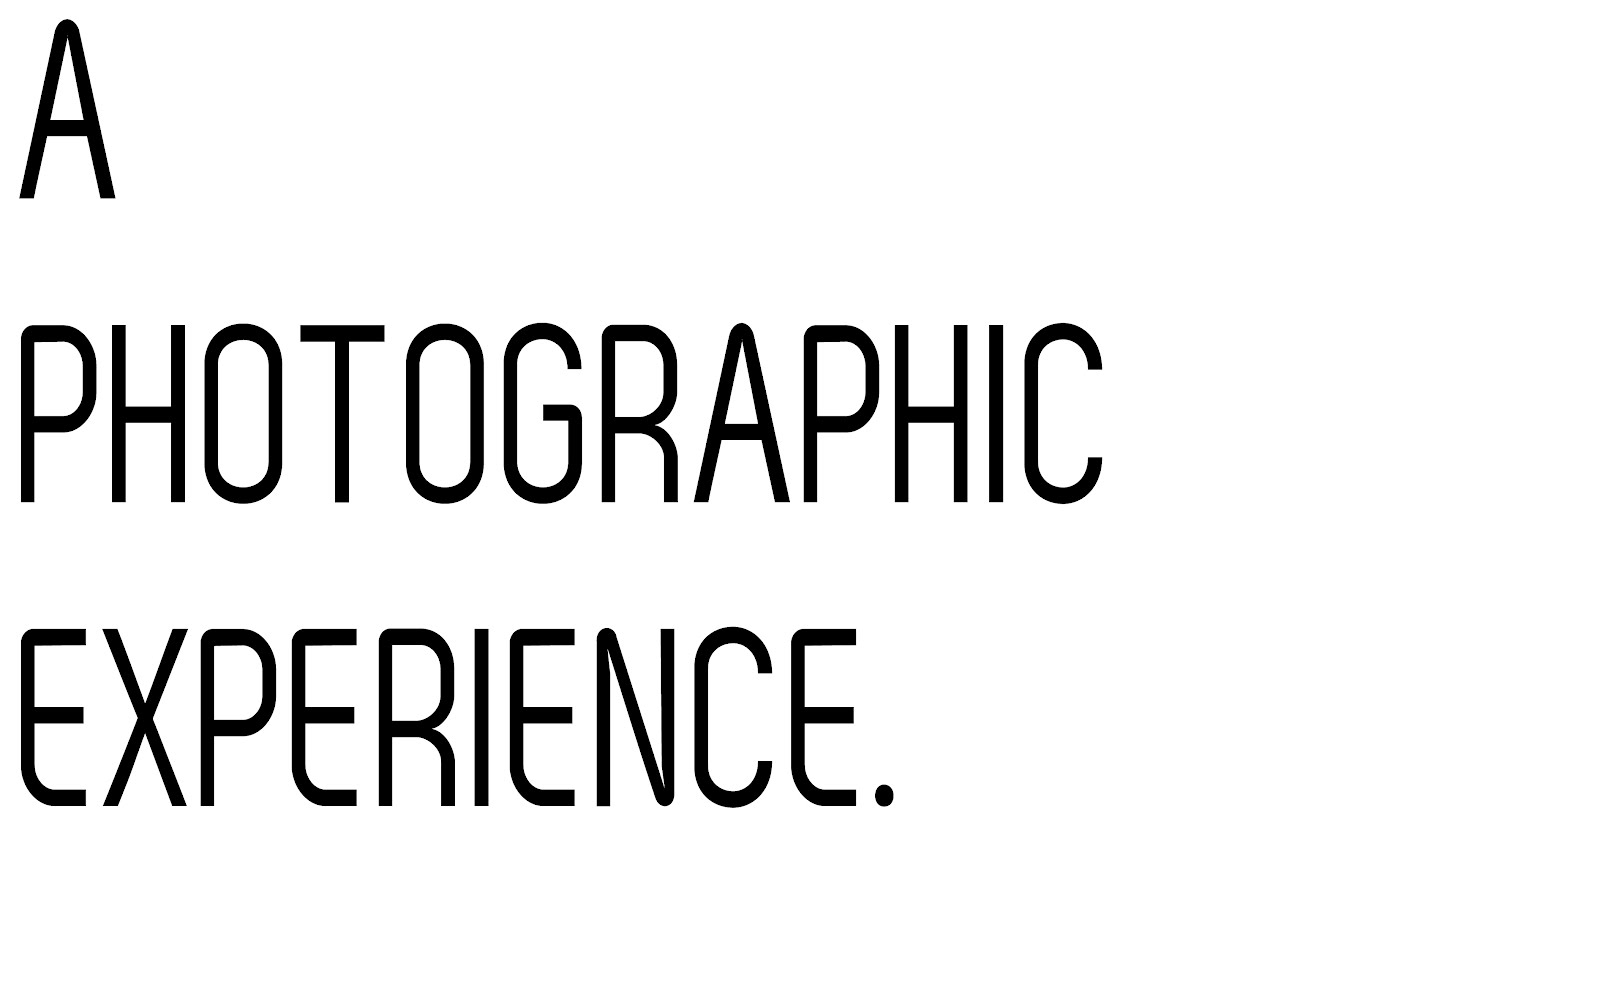 A Photographic Experience.